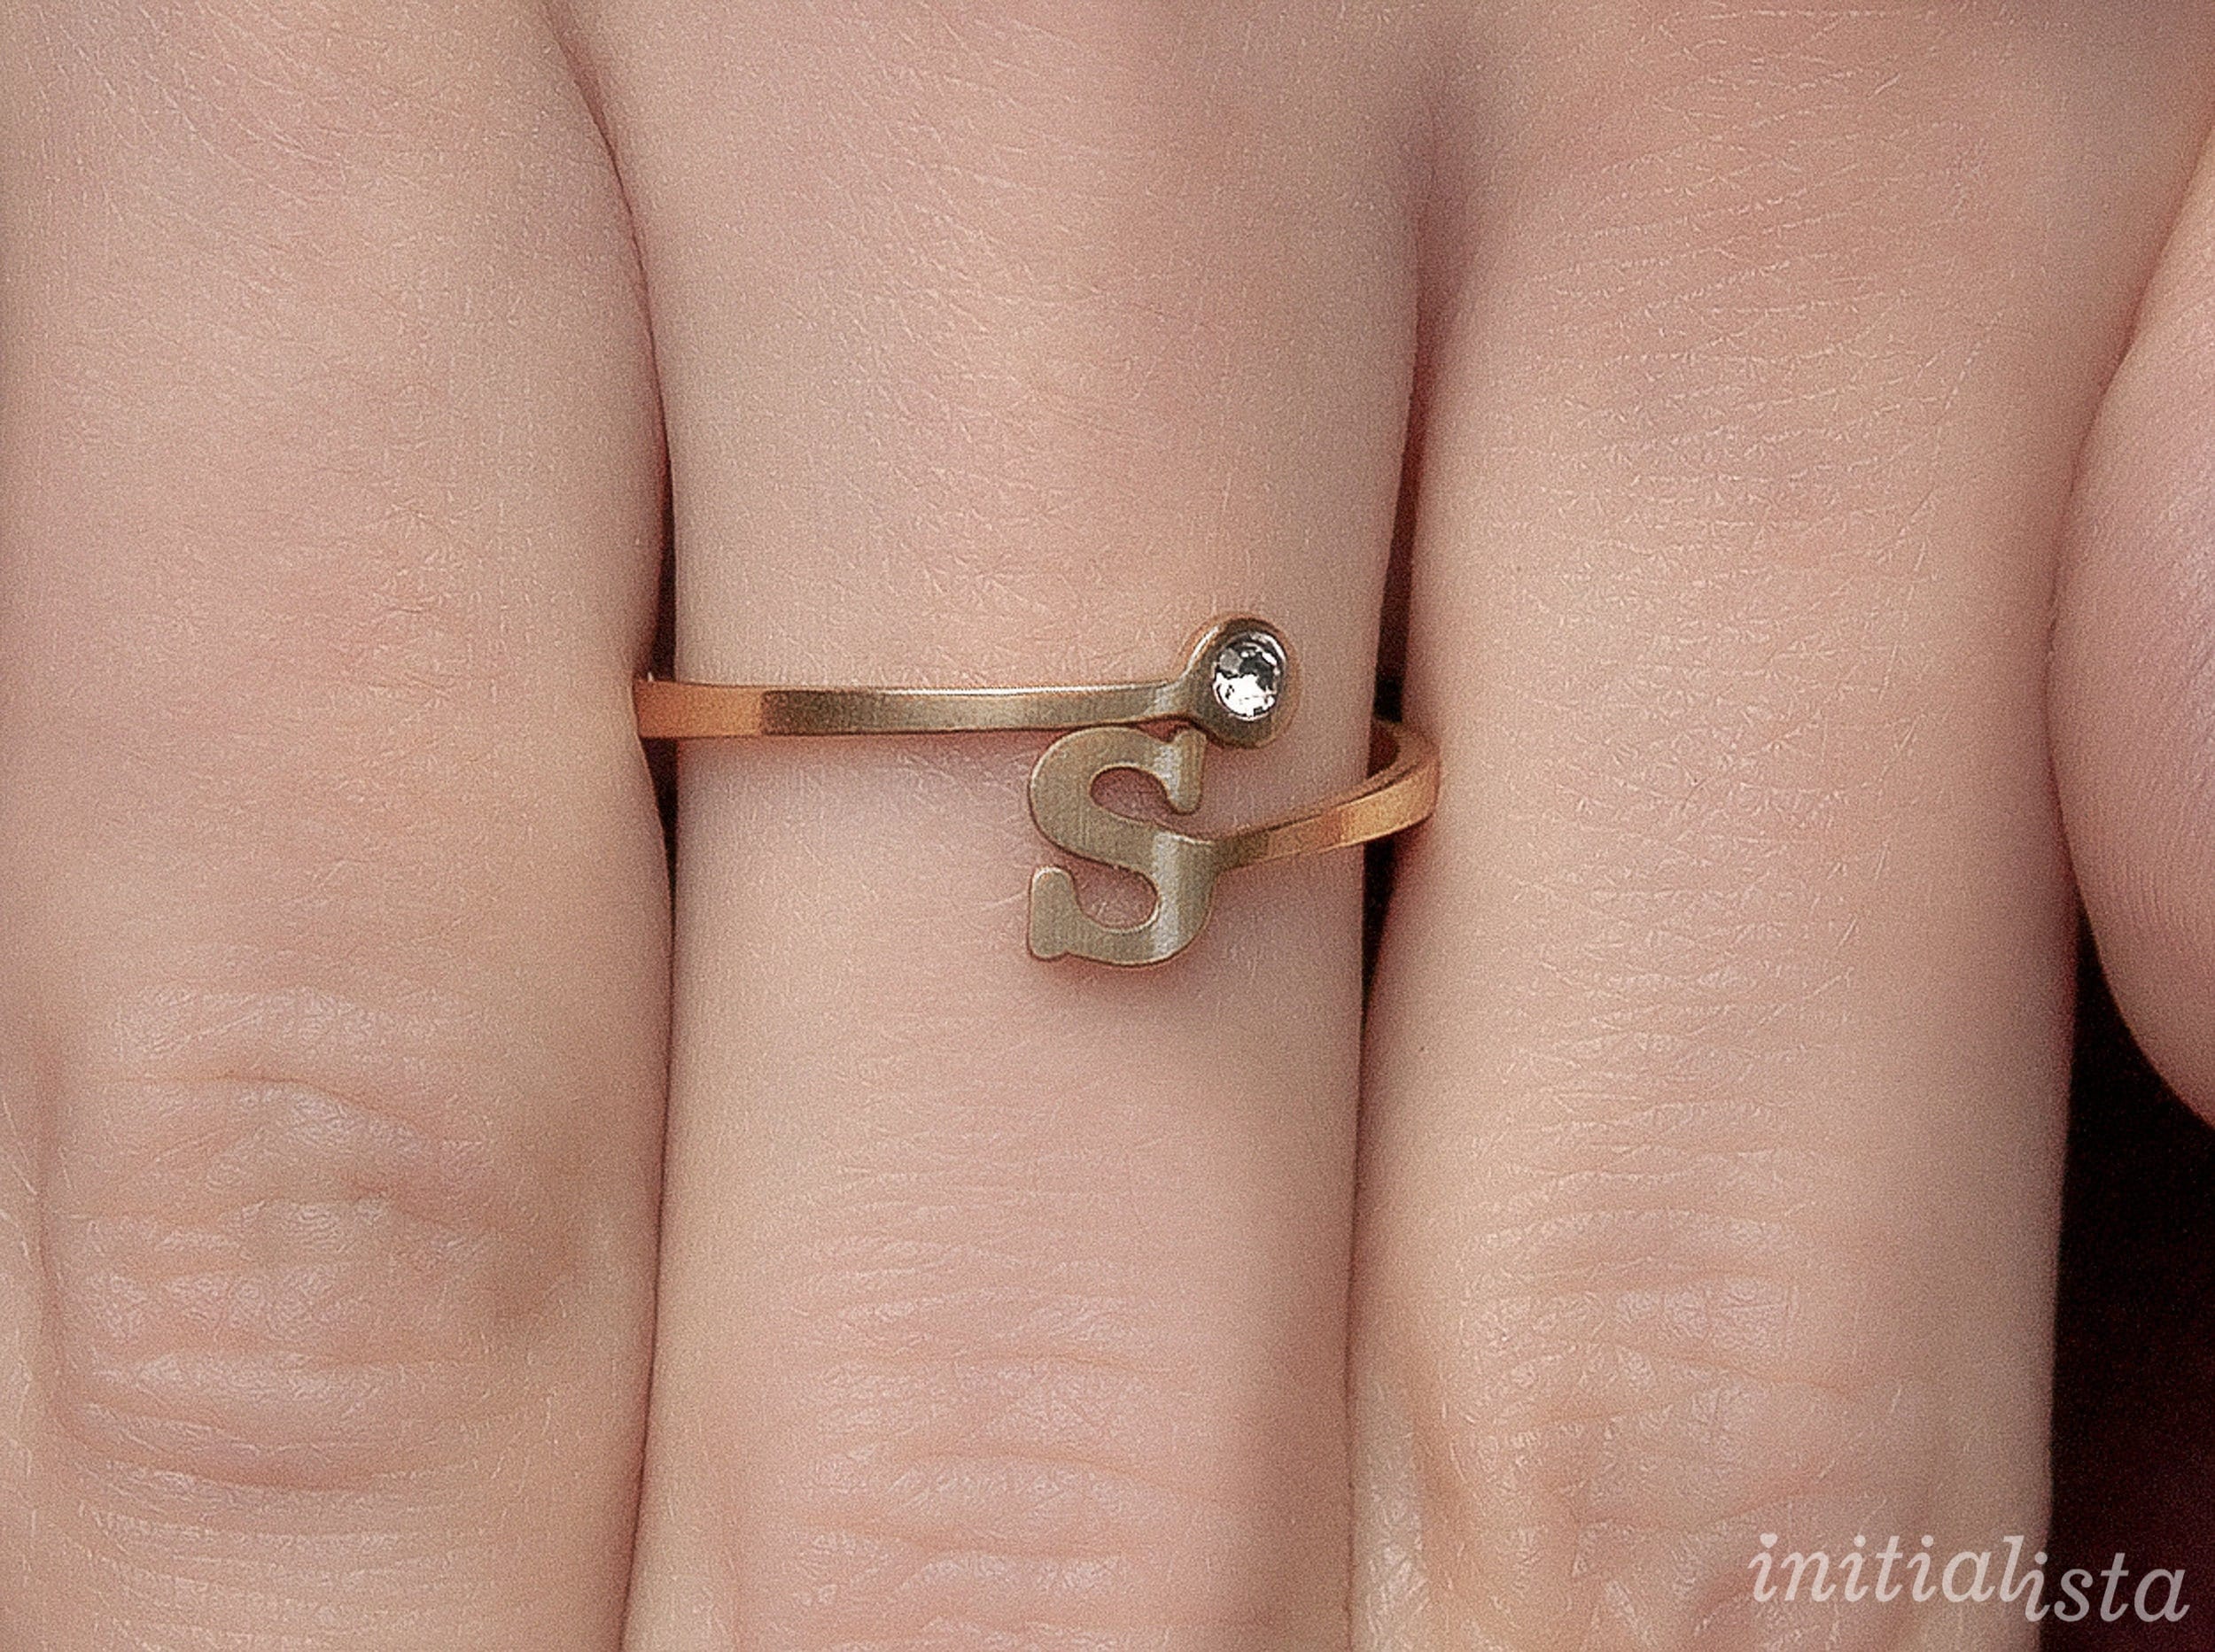 Slim Hebrew Name Ring in Sterling Silver with Color Option, Personalized  Name Jewelry | Judaica Web Store